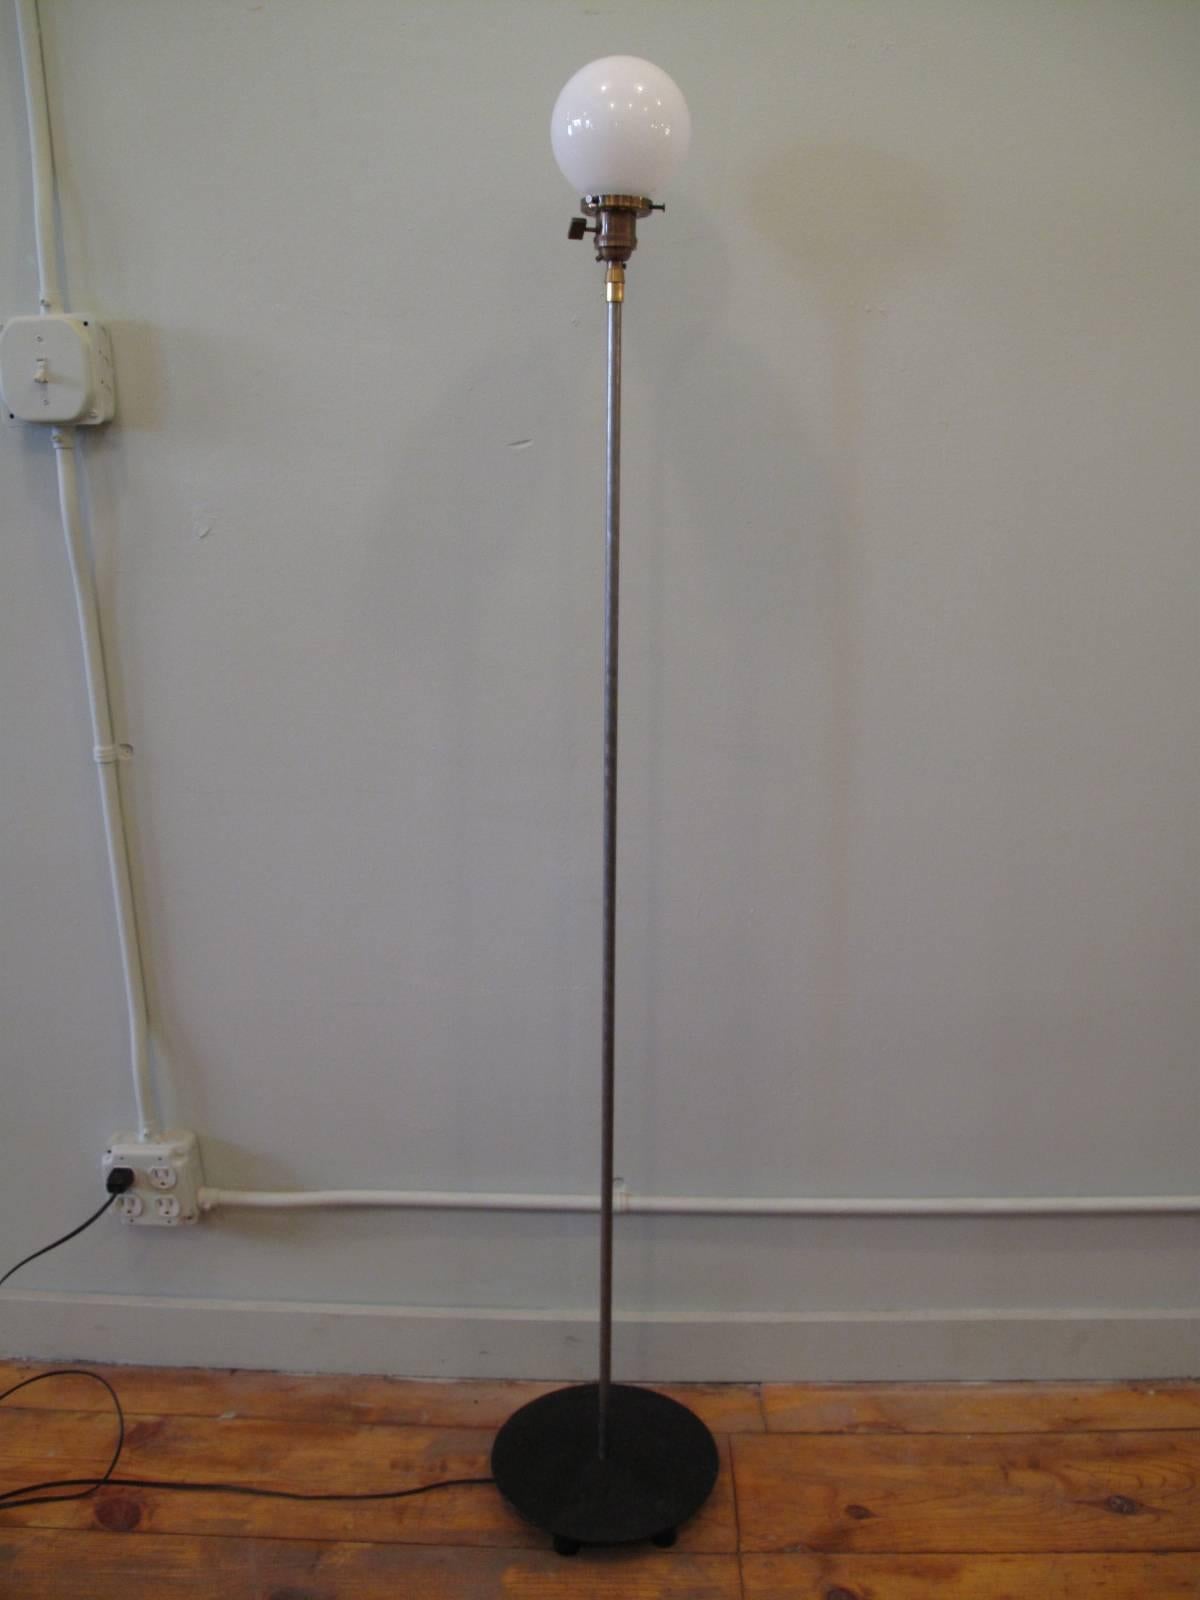 Single light floor lamp on weighted iron base. Milk glass globe sits in antiqued brass fitter. Raw steel body. 

Globe measures 5" in diameter

Please note: This lamp is currently in working condition. However, we recommend that all